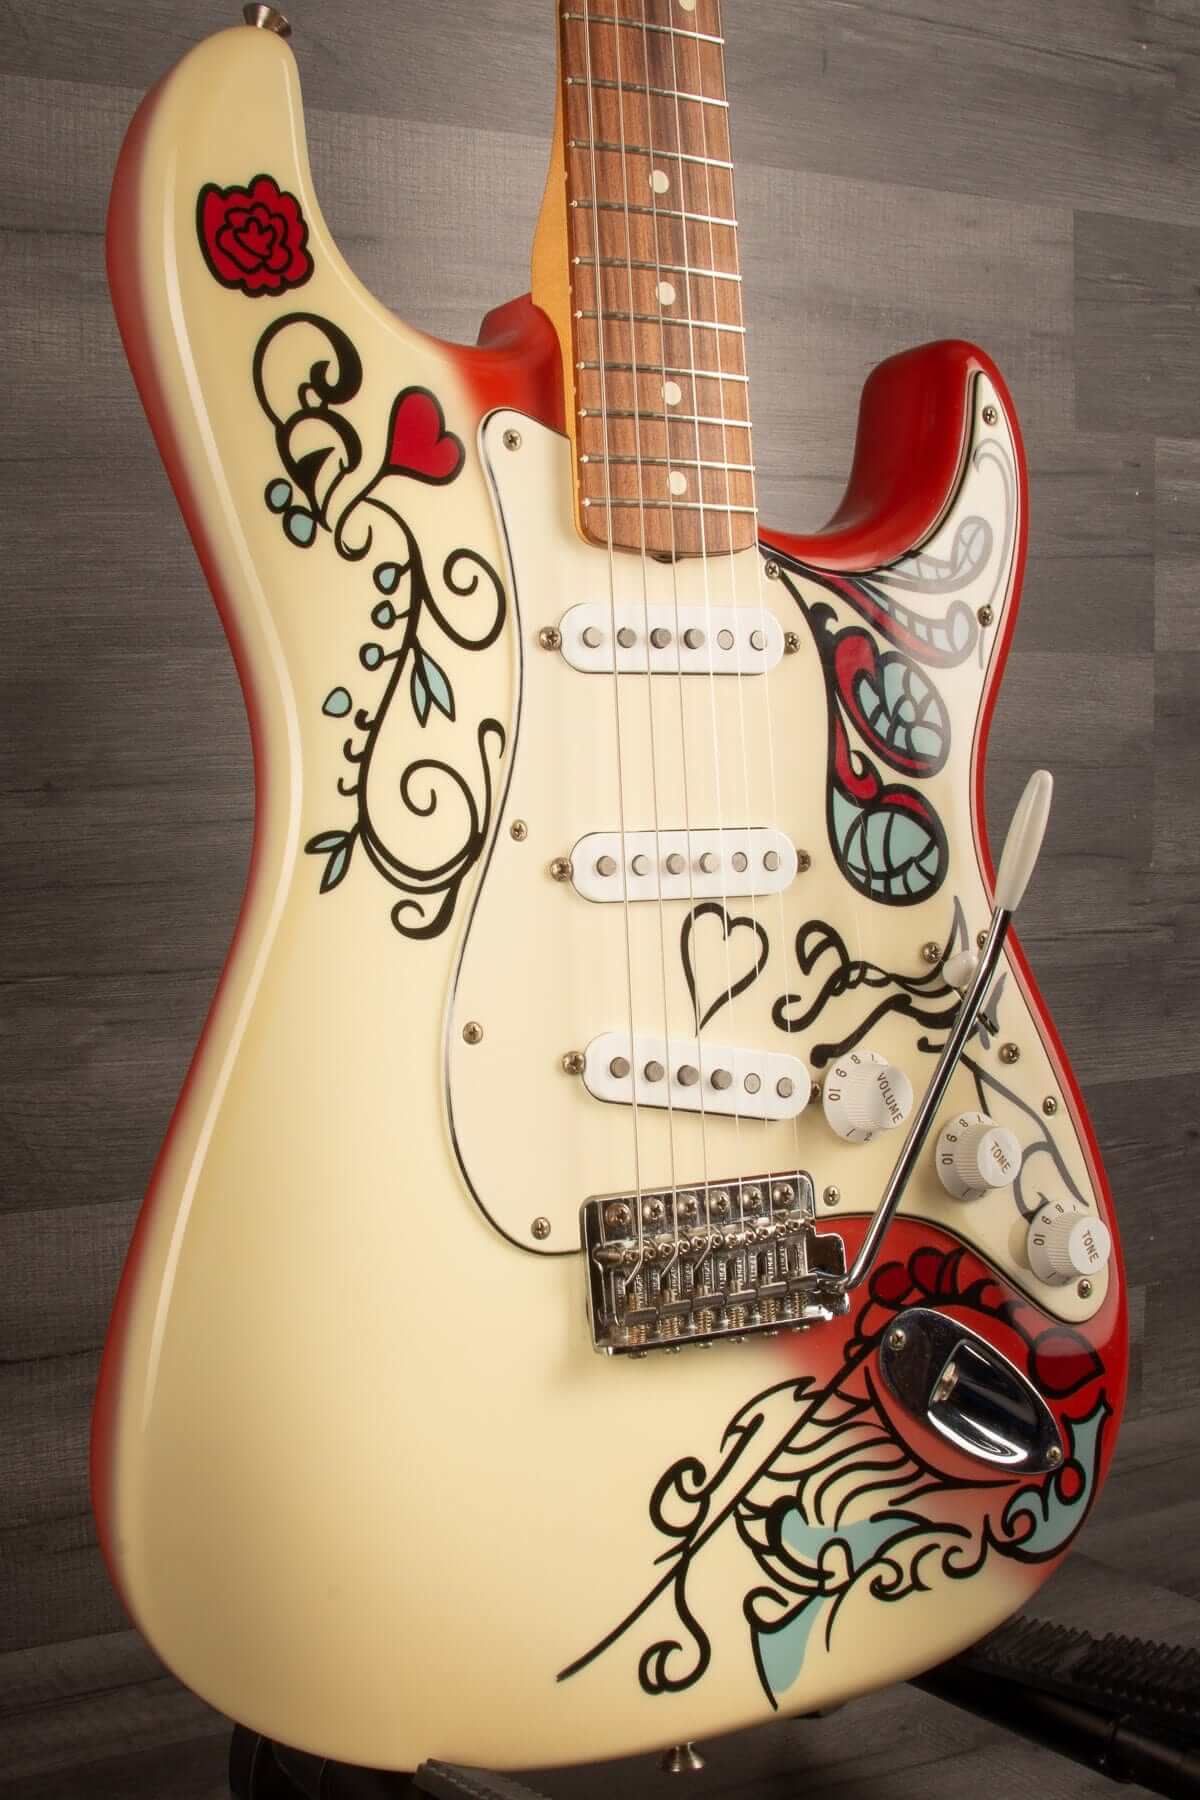 Fender Electric Guitar USED - Fender Jimi Hendrix Monterey Stratocaster Limited Edition Guitar